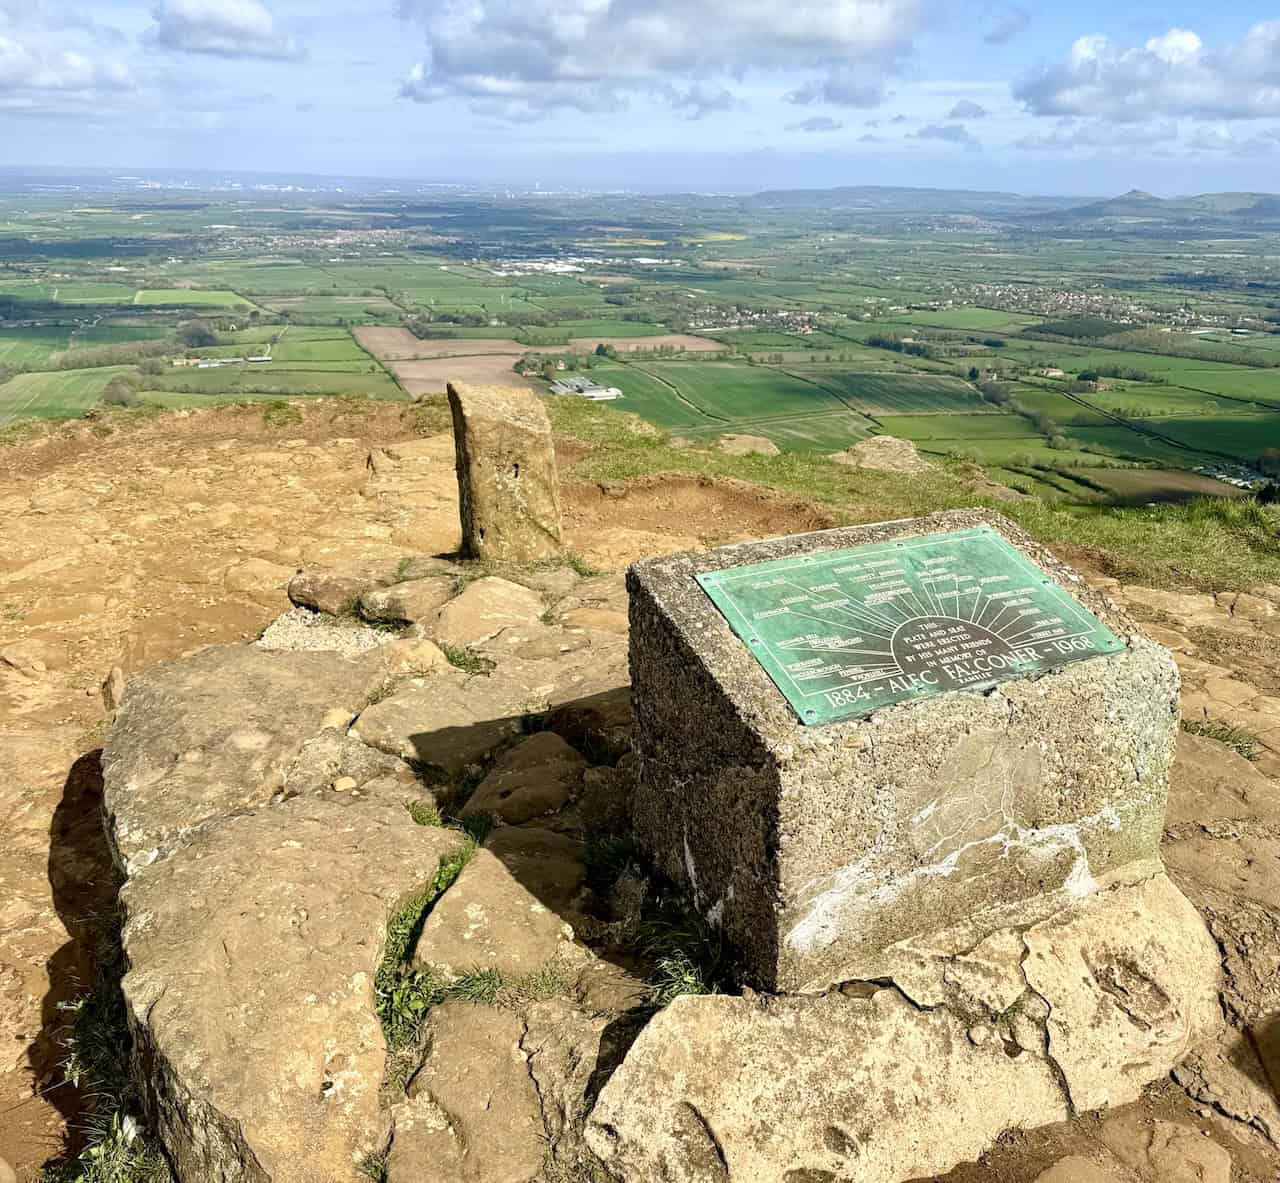 At the viewpoint on Cringle Moor, there is a seat and a topographical plate erected by the friends of Alec Falconer (1884-1968) in his memory. The plate commemorates Alec as a rambler. On clear days, the superb views explain why one would cherish time spent here.